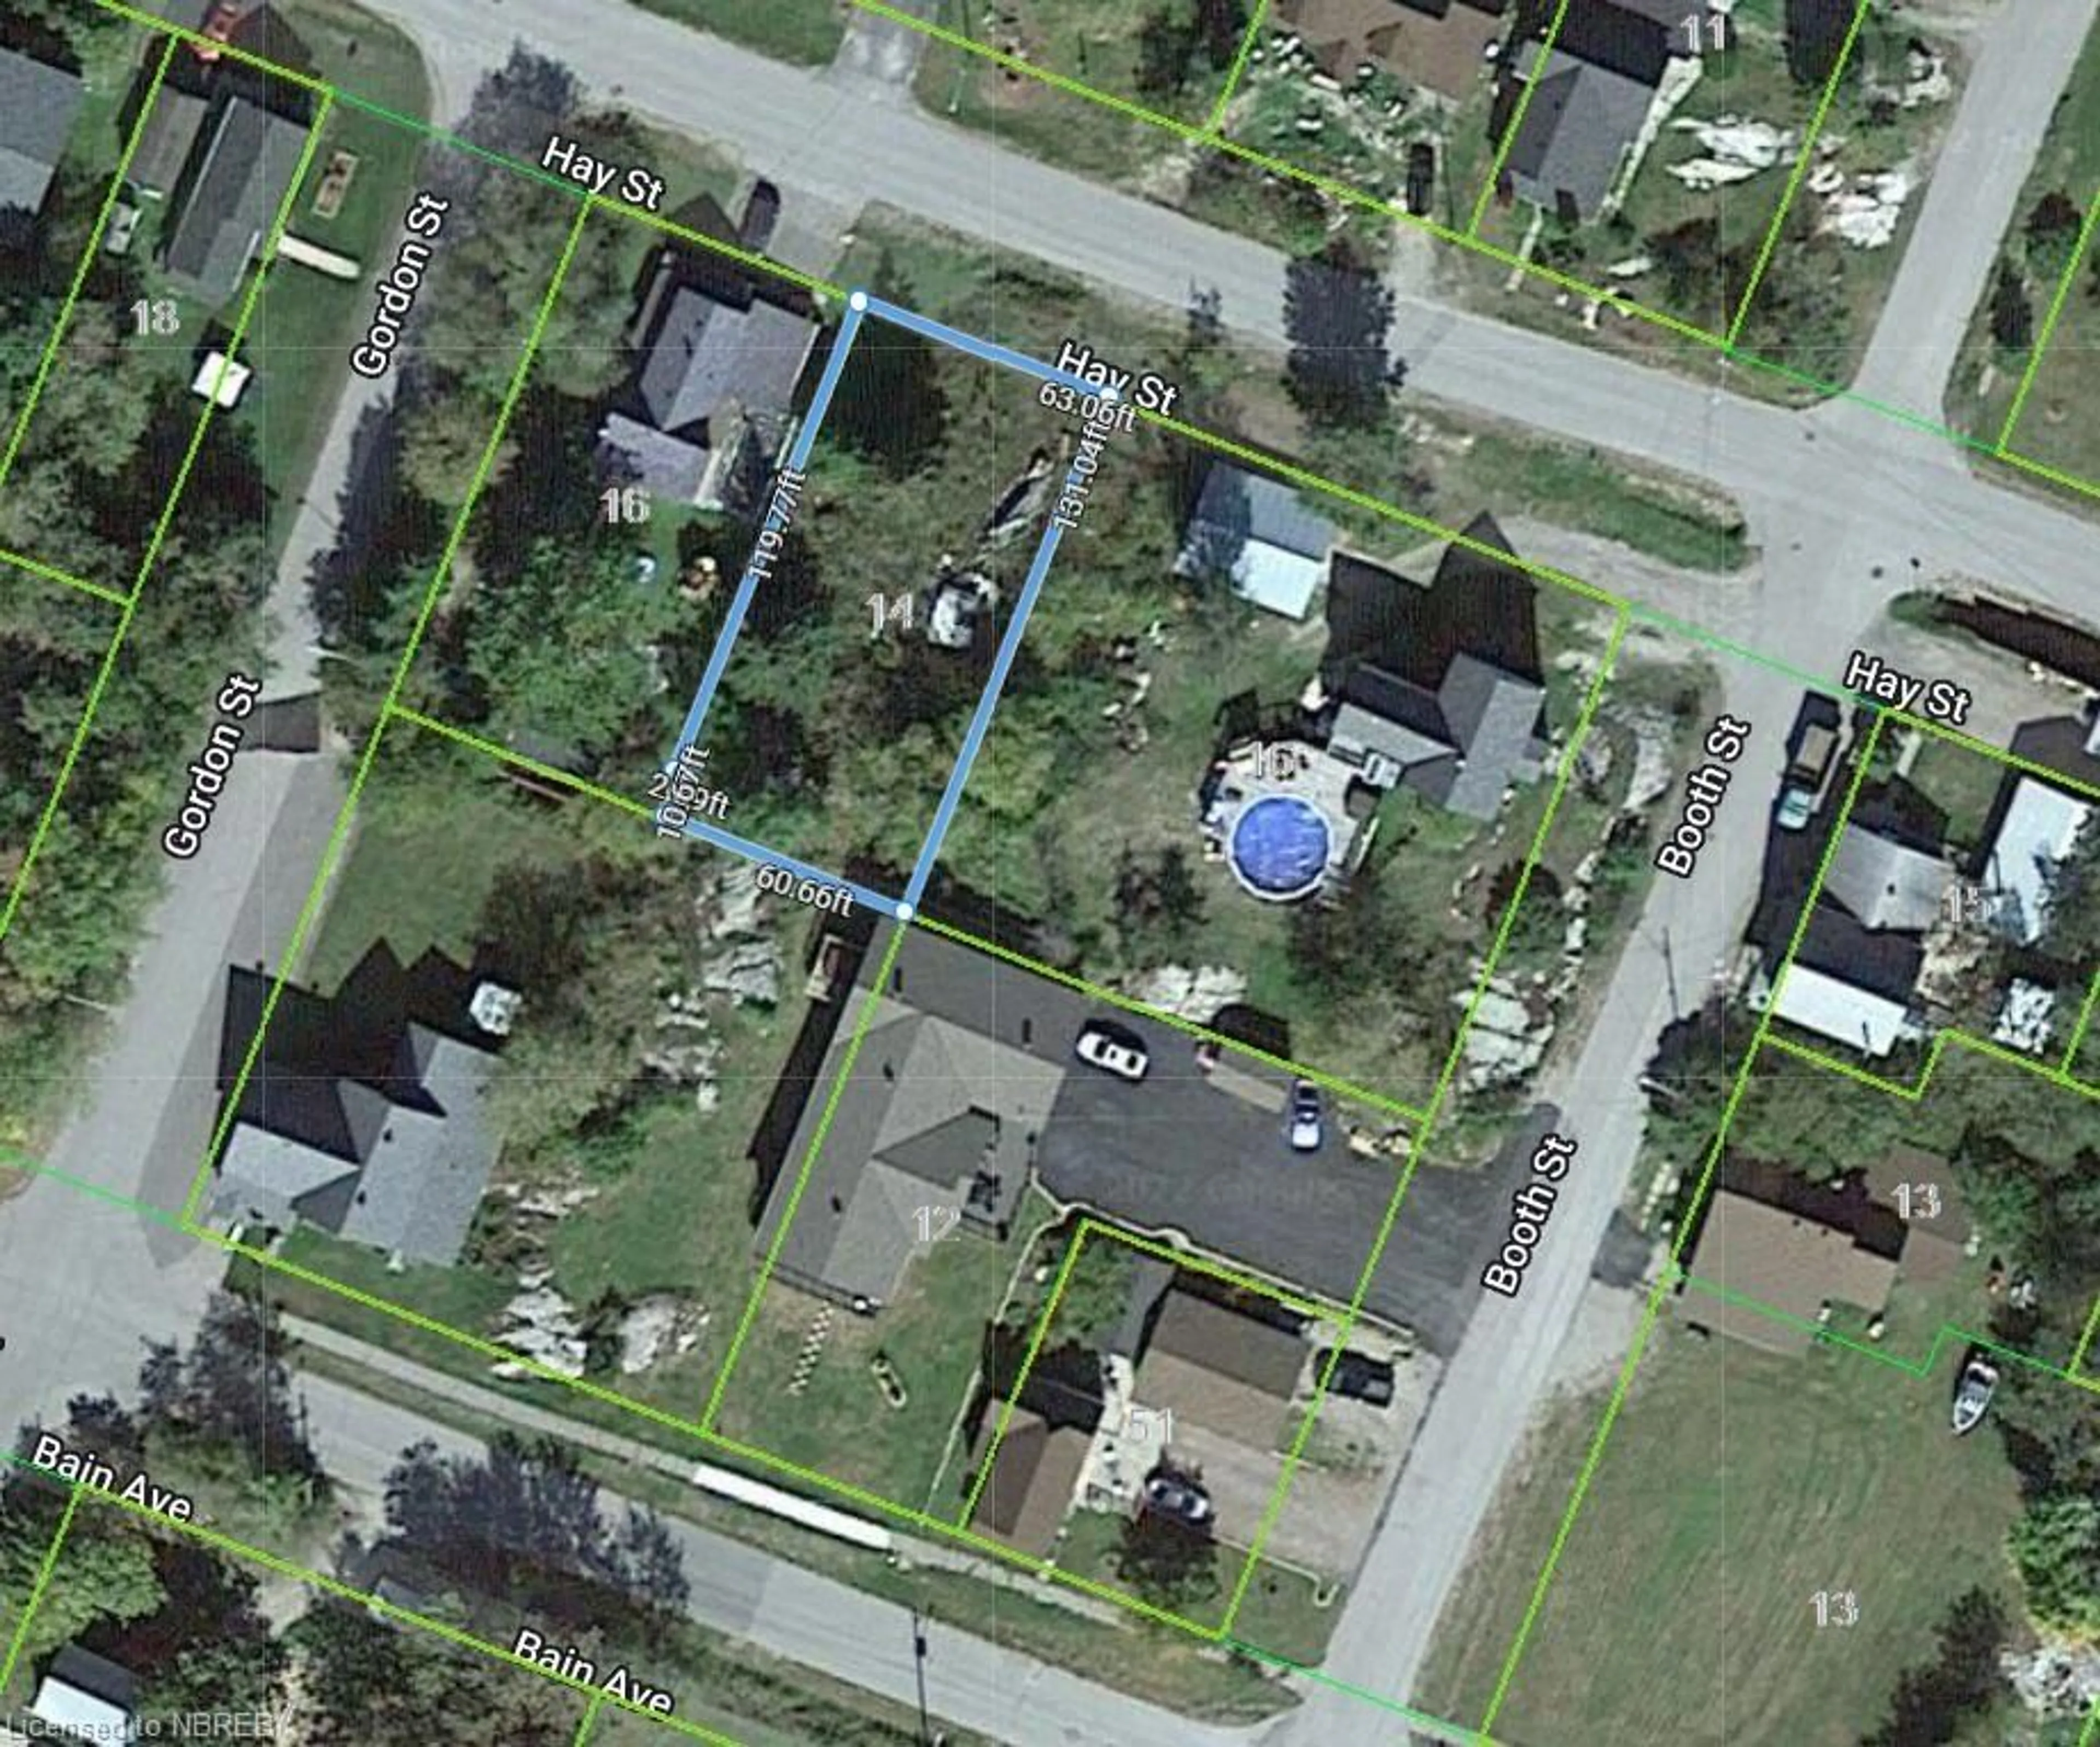 Street view for 14 Hay St, Cache Bay Ontario P0H 1G0